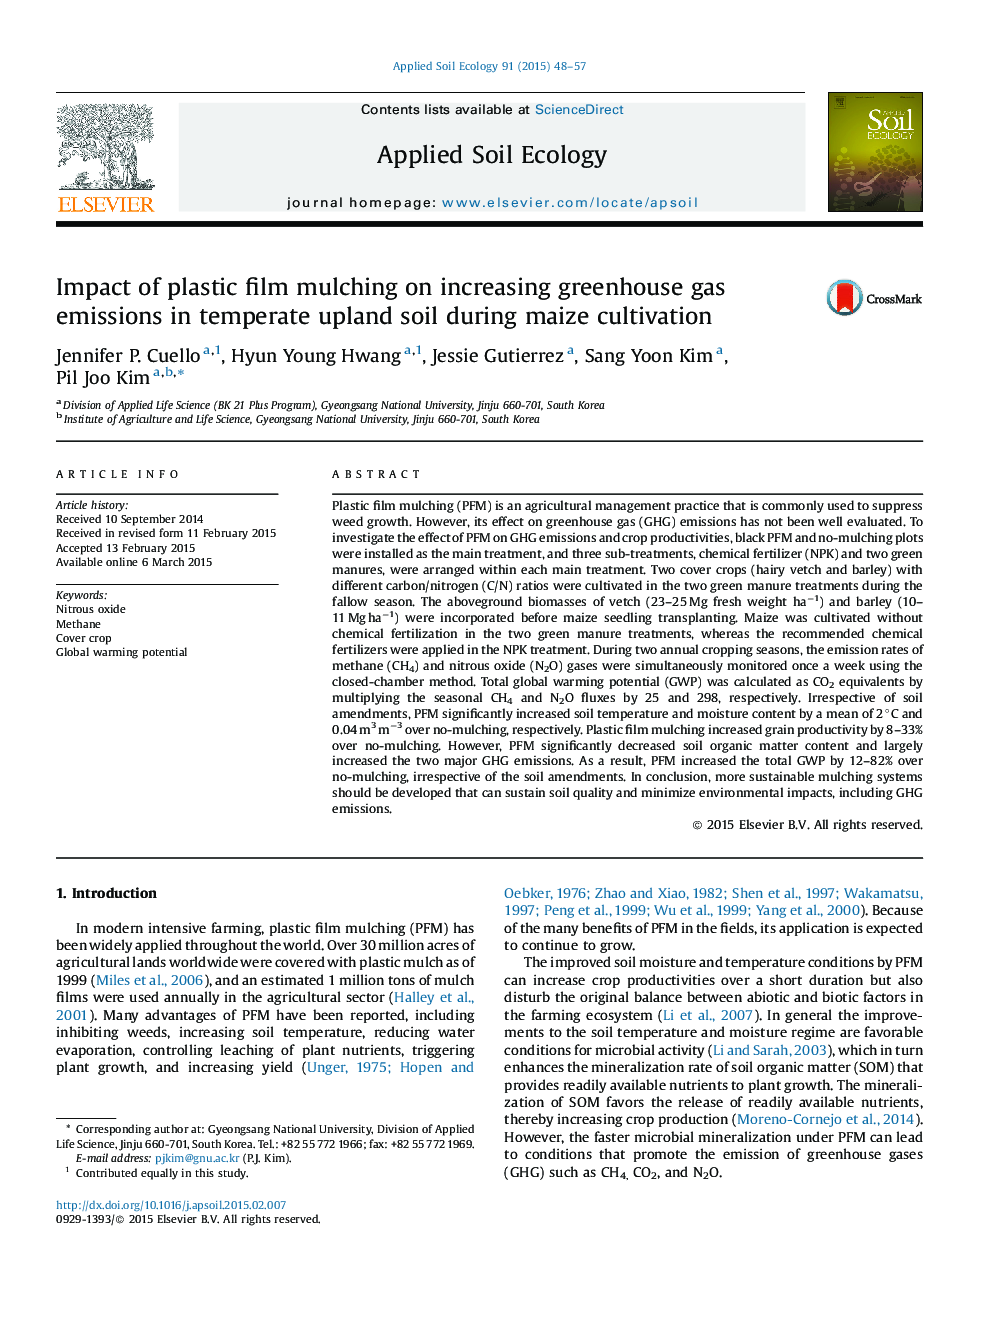 Impact of plastic film mulching on increasing greenhouse gas emissions in temperate upland soil during maize cultivation